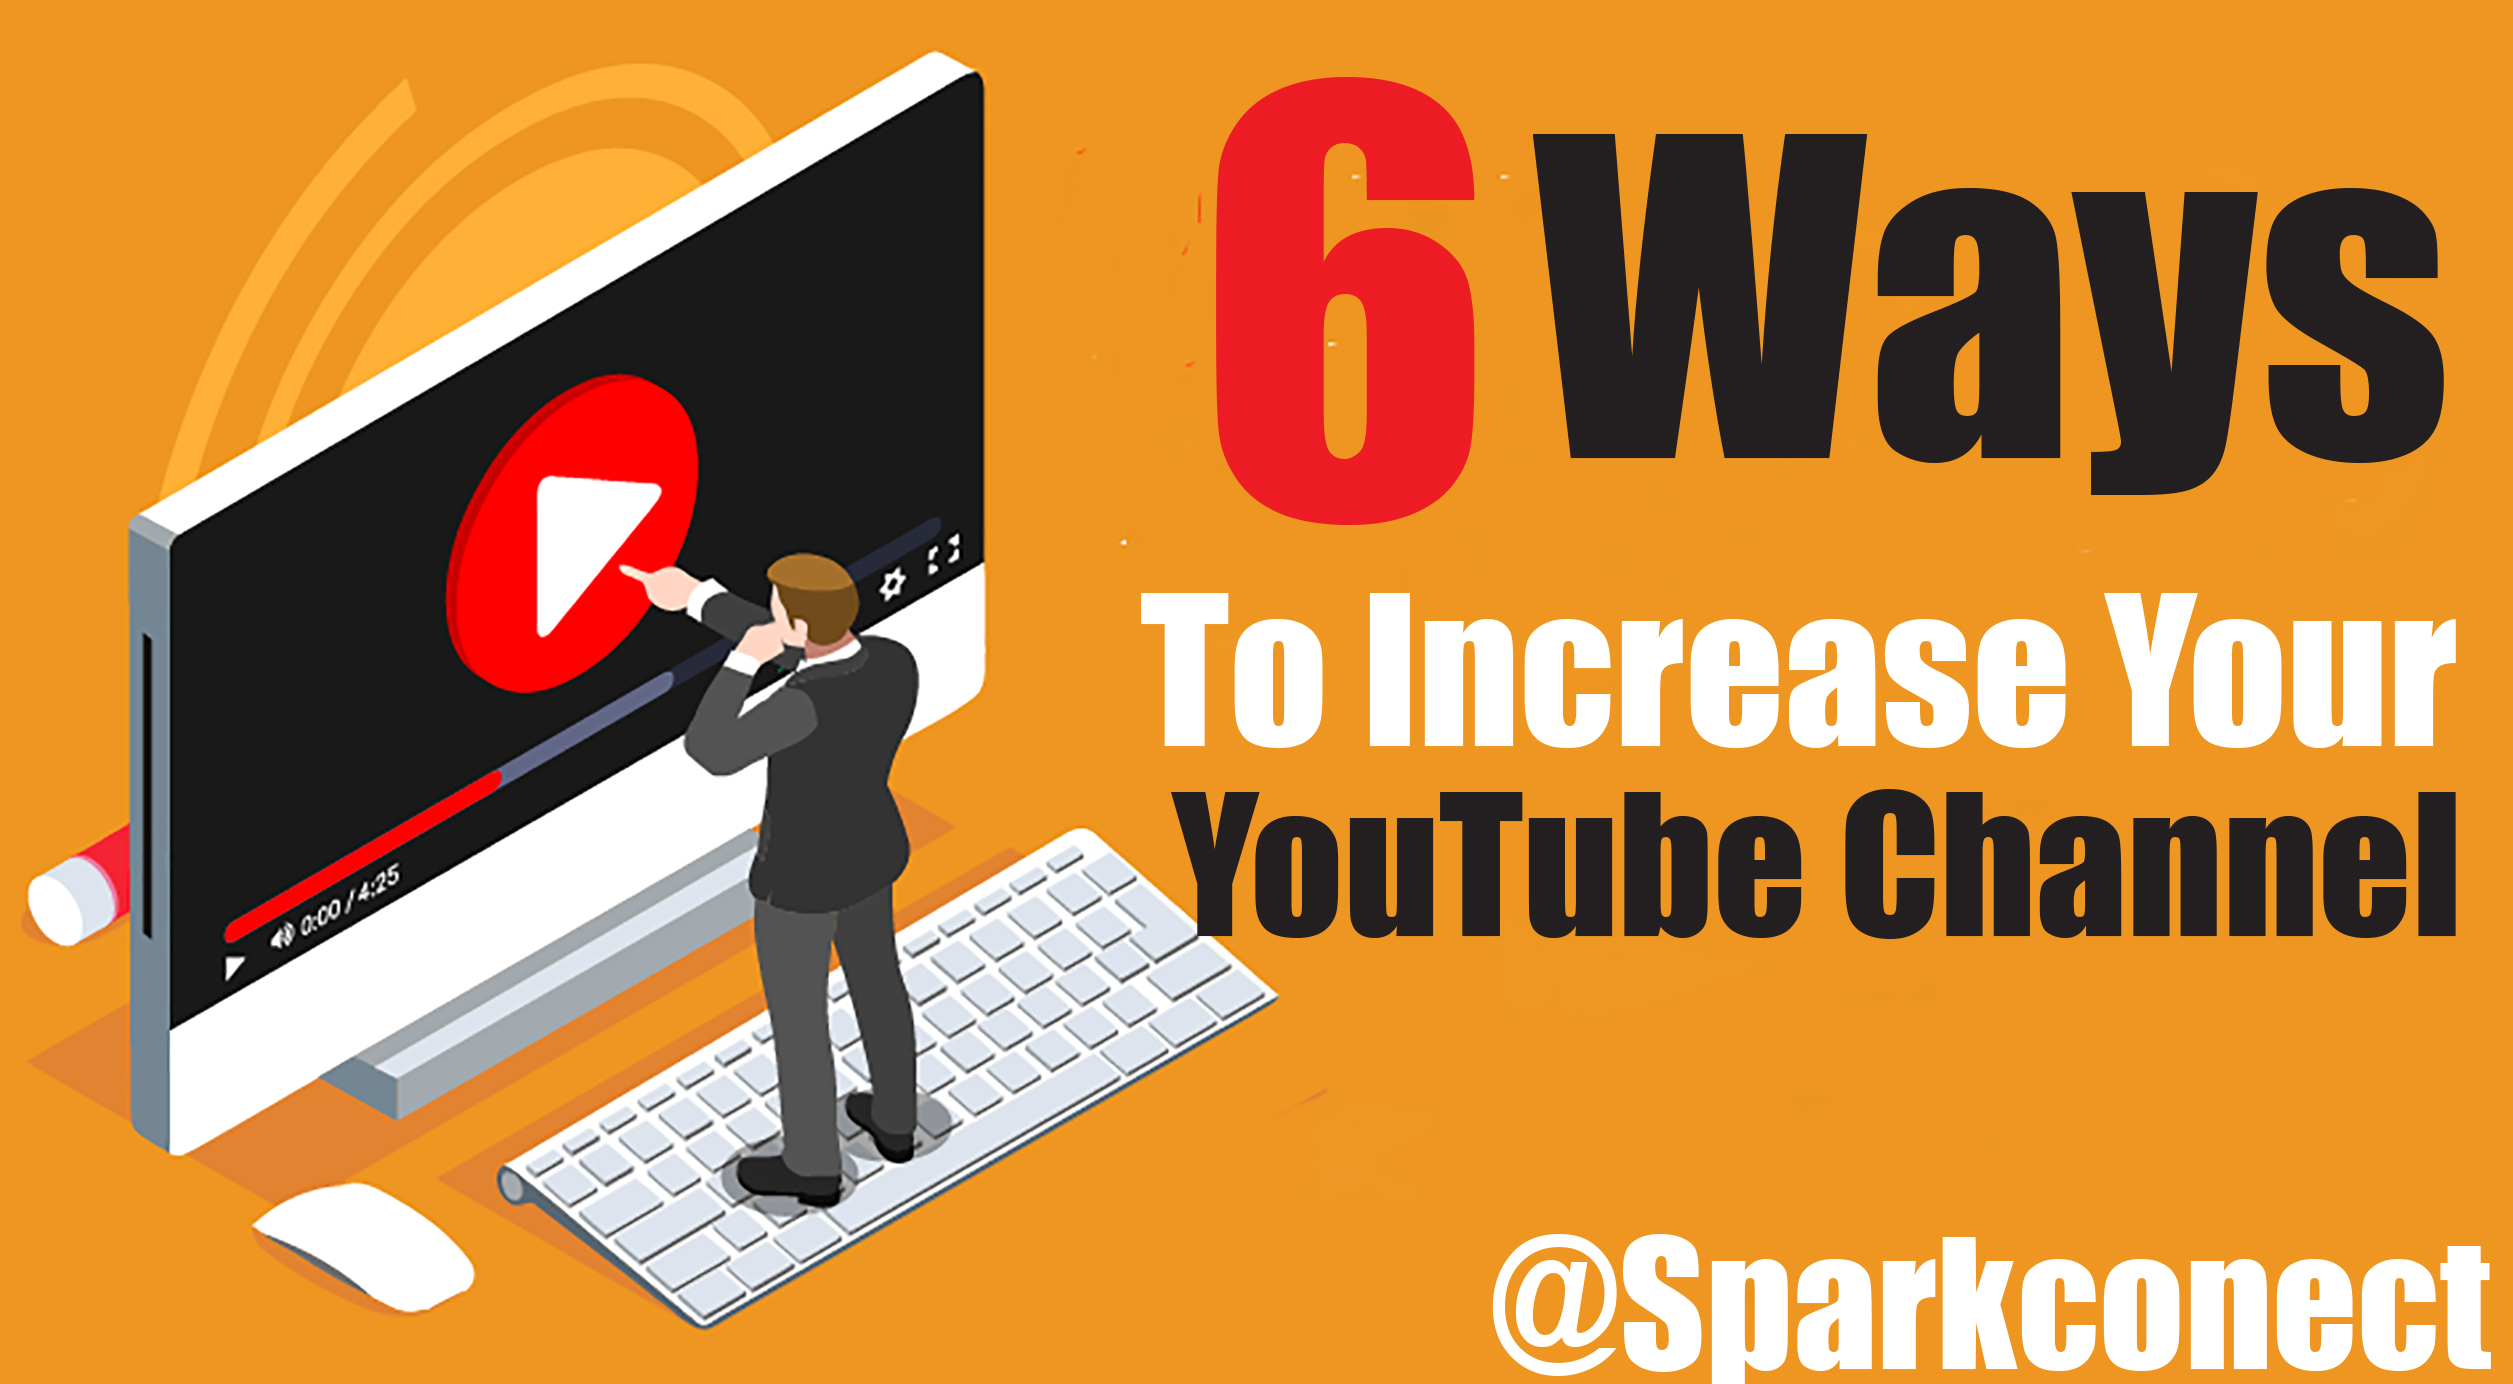 6 Ways to Increase Your YouTube Channel